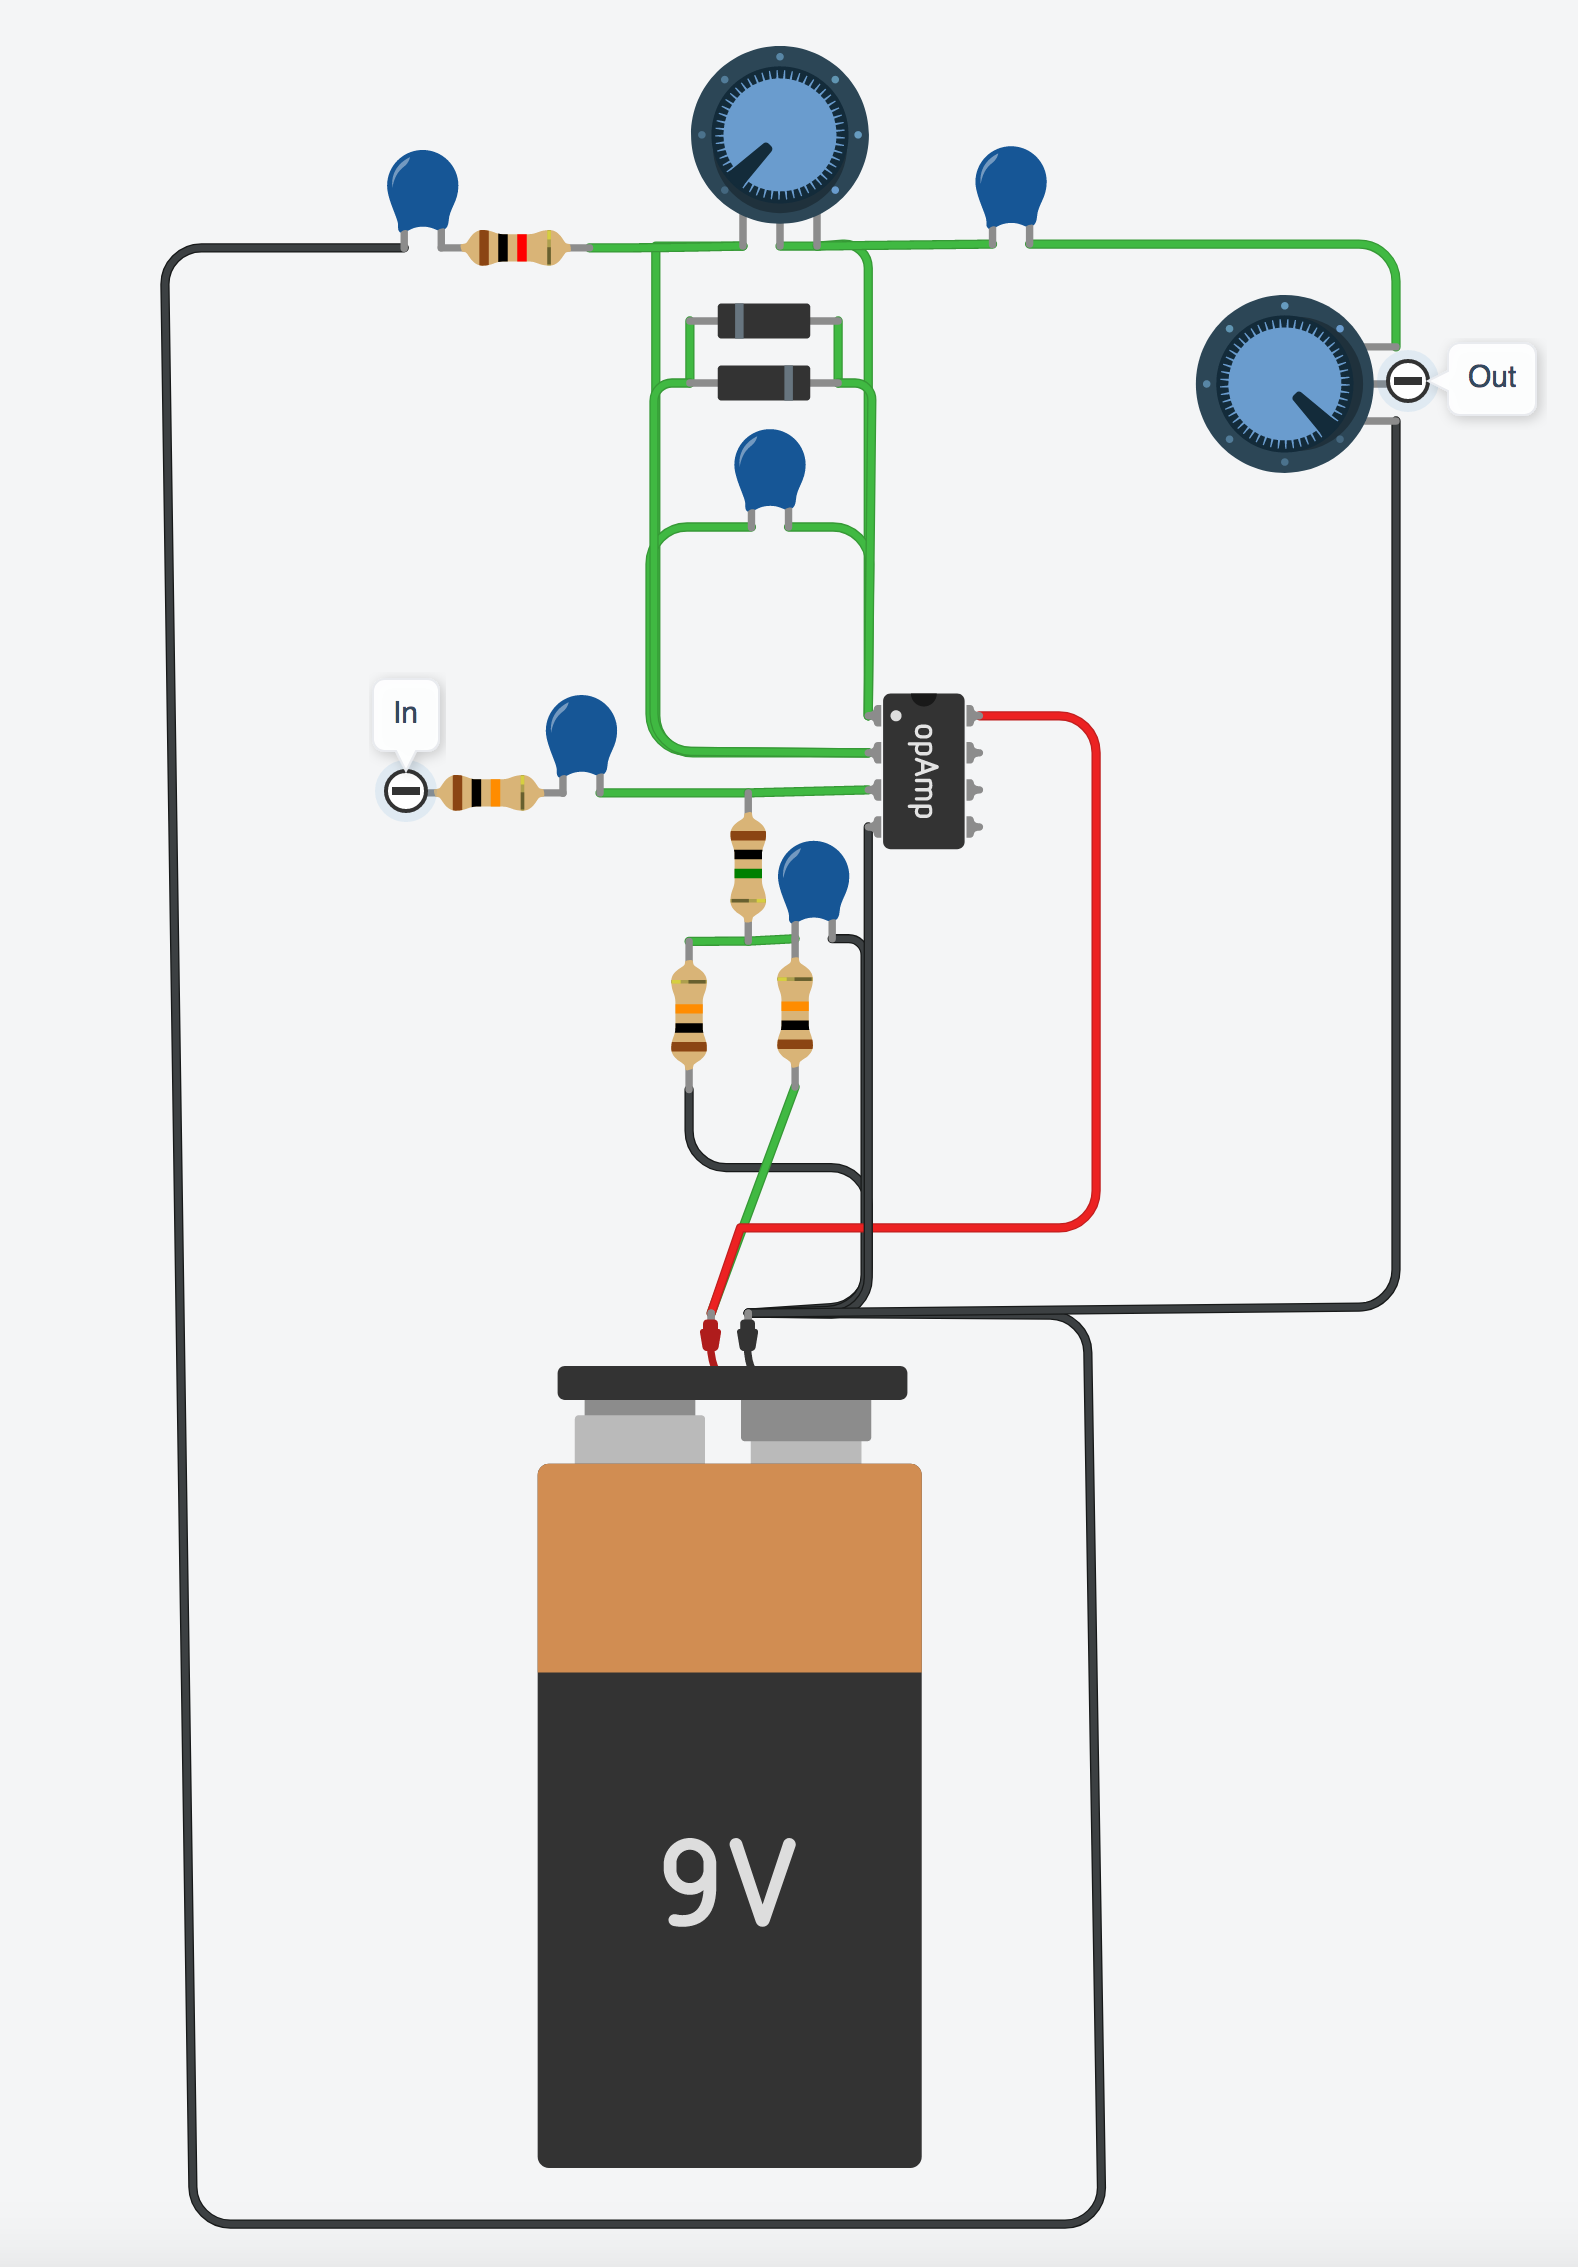 Design A Basic Overdrive Pedal Circuit